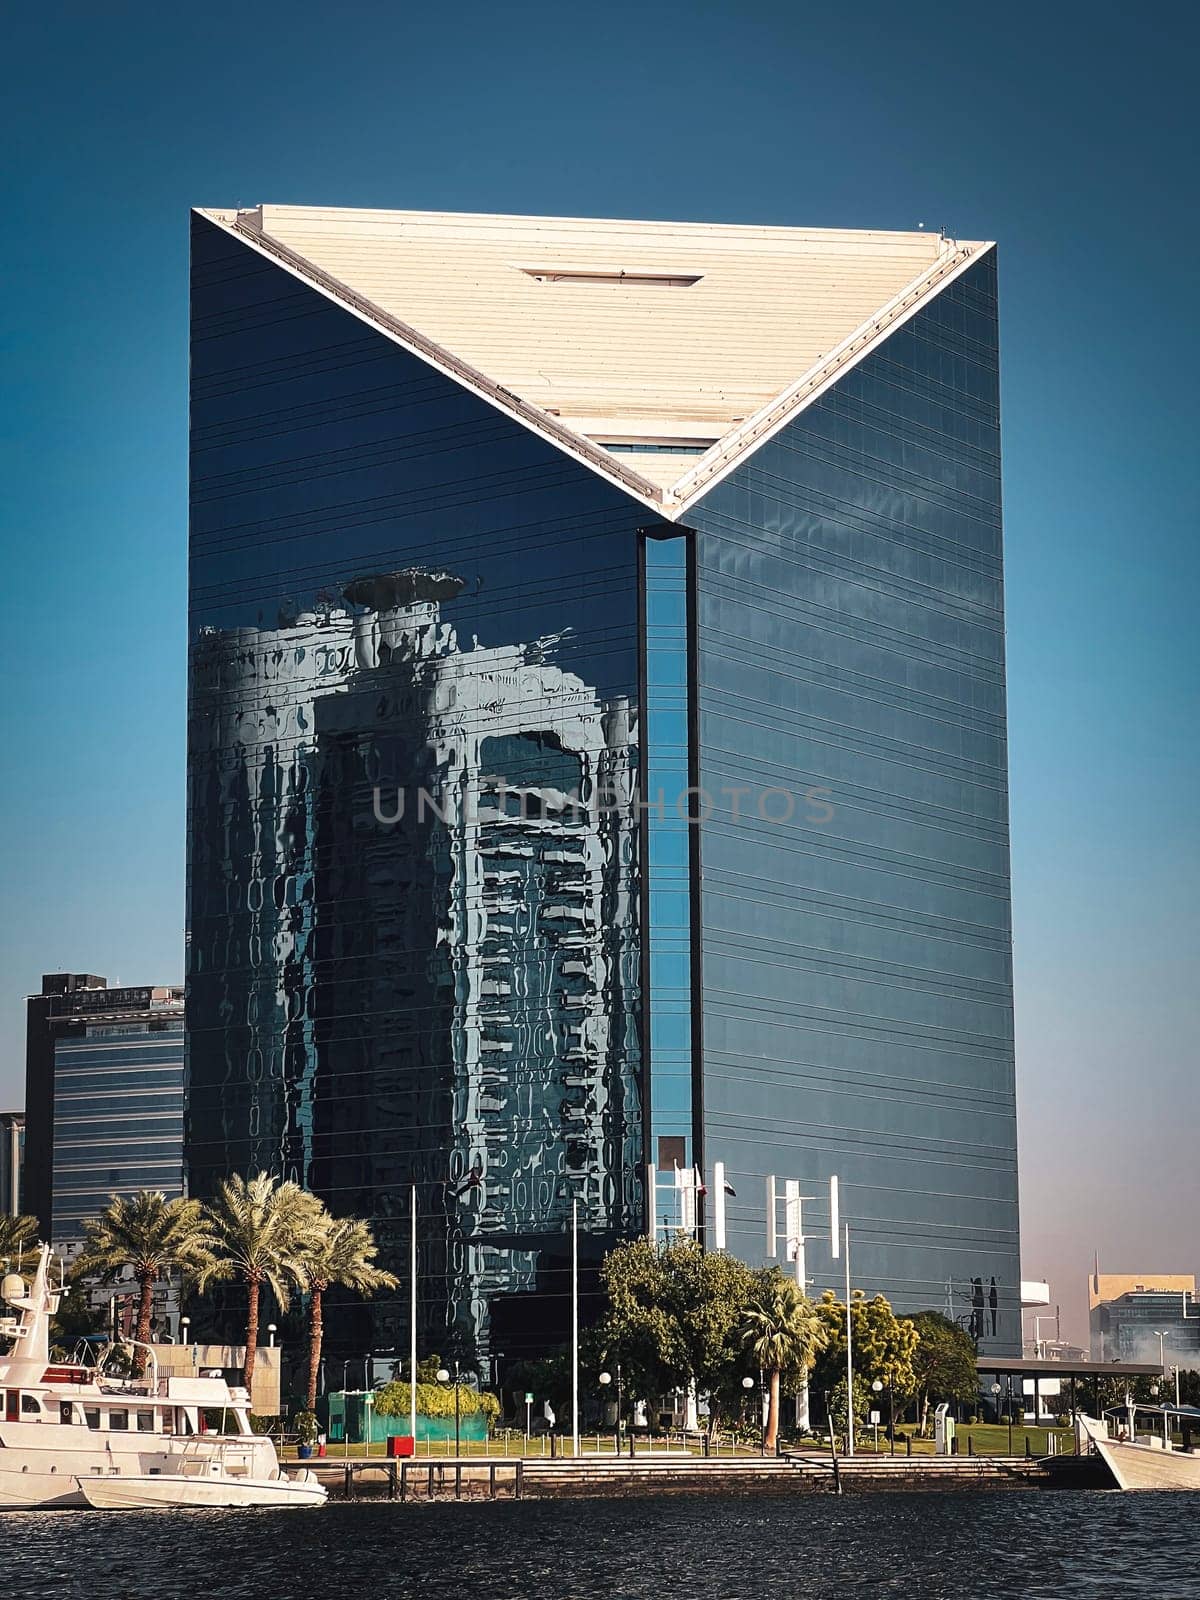 DUBAI CREEK, UAE, the Chamber of Commerce building and waterfront, 91 m in height